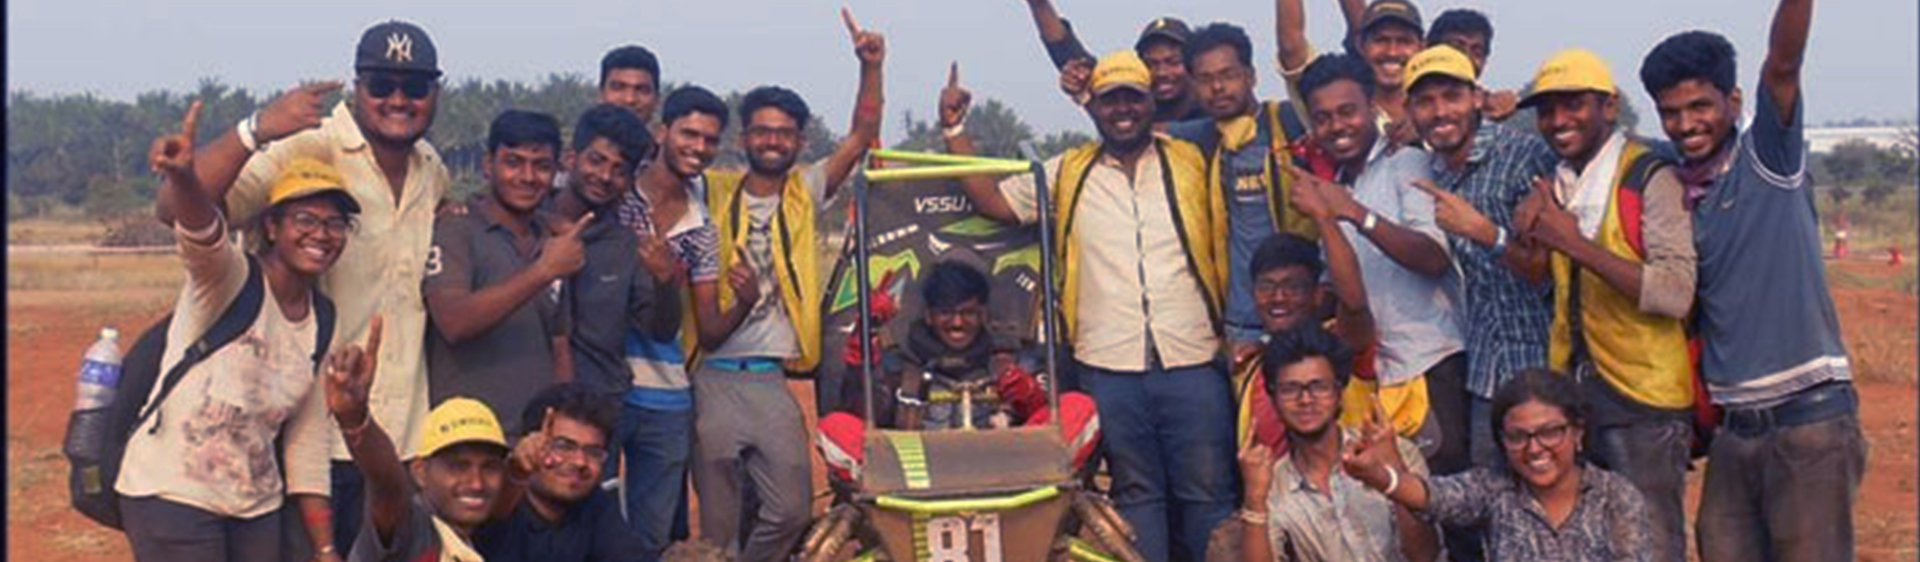 All India Rank - 1st in  ENDURANCE Race in ESI-2018, Coimbatore Held on 7th January, 2018